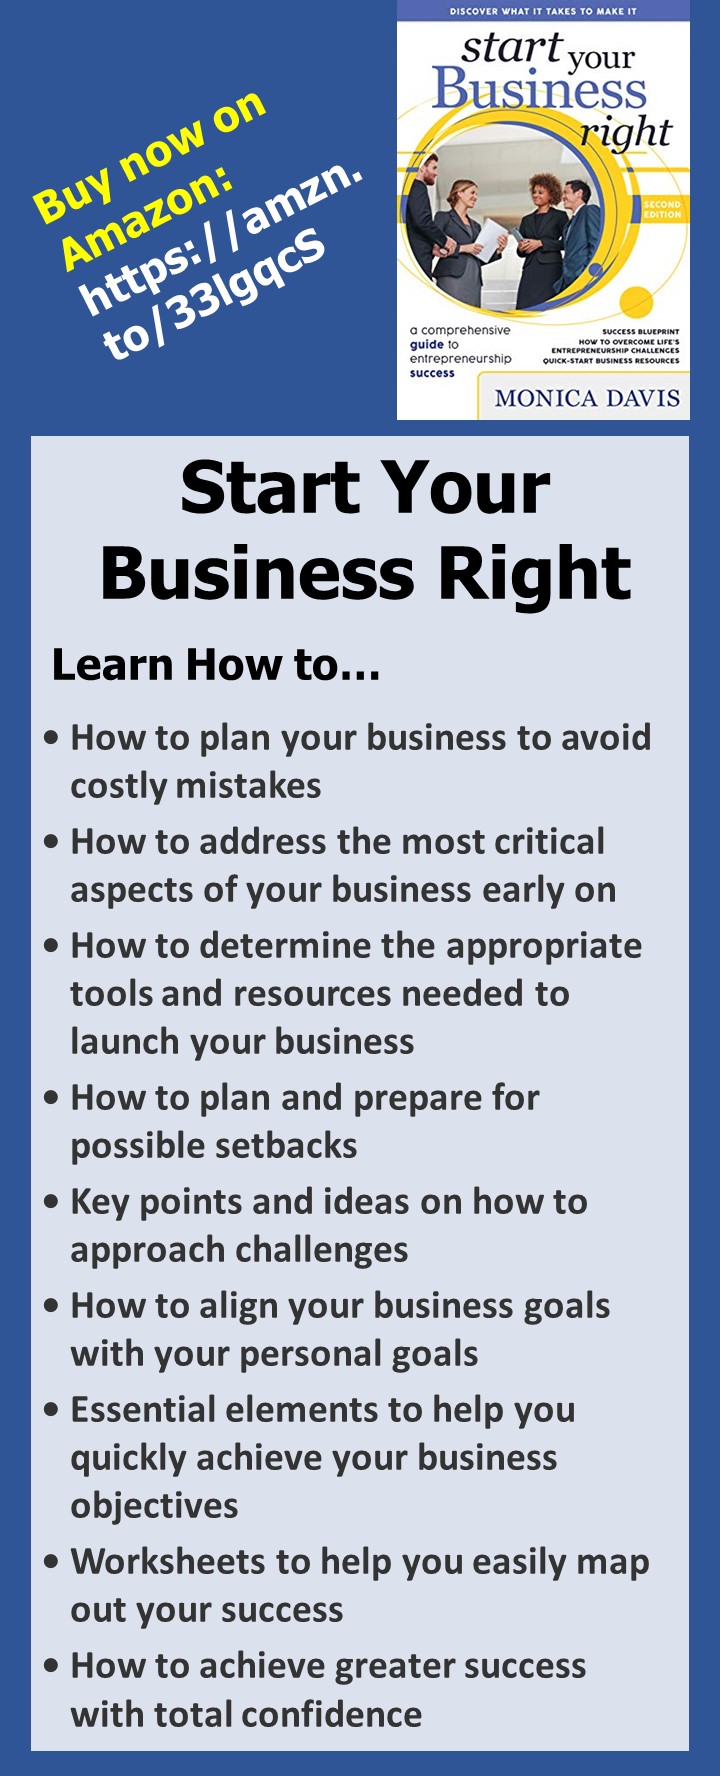 Start Your Business Right by Monica Davis